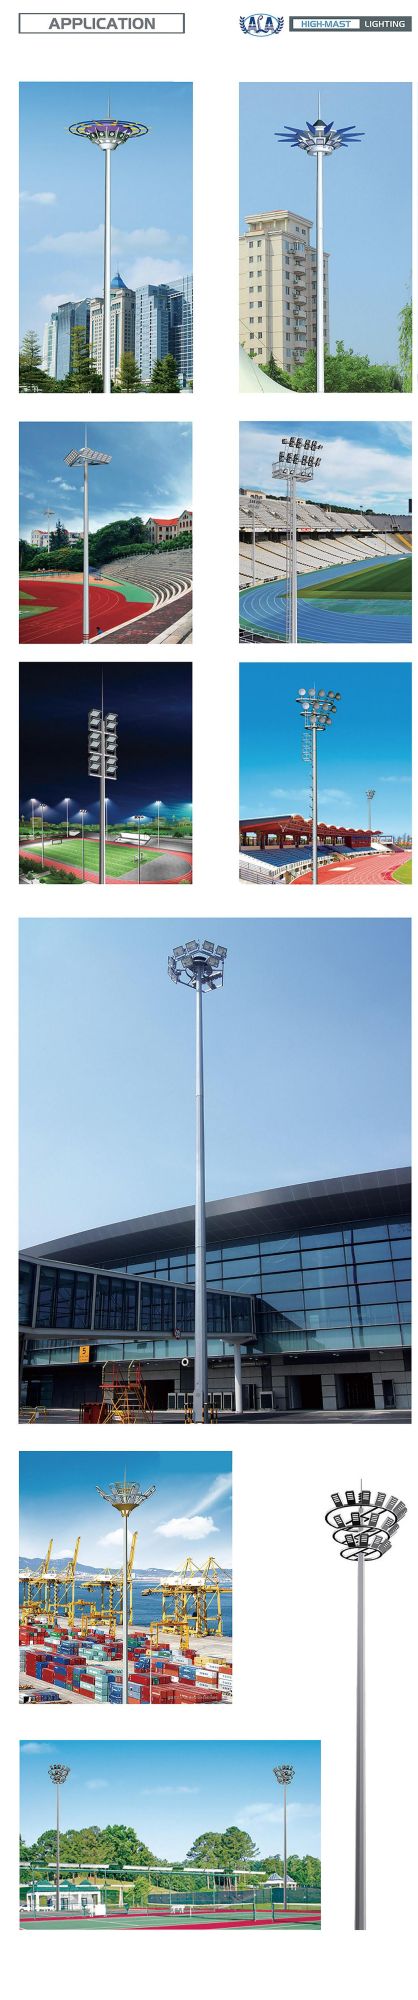 Ala Hot Sale Steel Round 400W High Mast Light with Pole Light for Outdoor Lighting 15m 20m 25m 30m